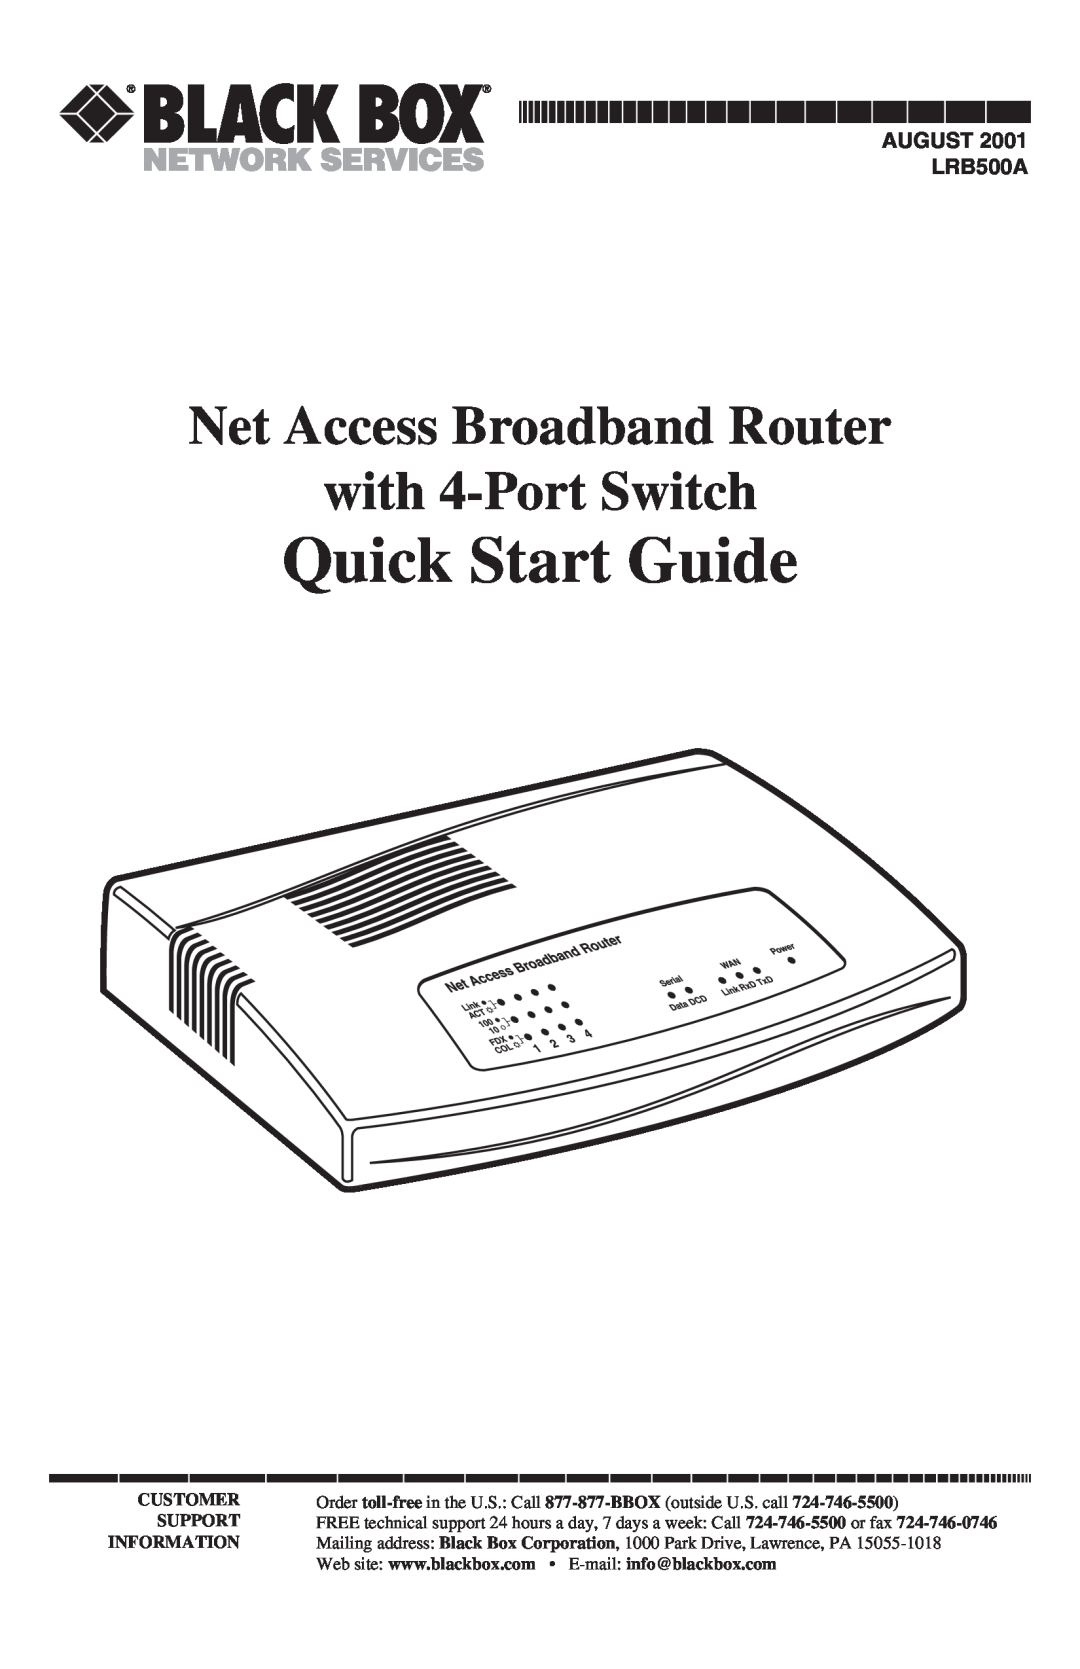 Black Box quick start Quick Start Guide, Net Access Broadband Router with 4-Port Switch, AUGUST LRB500A, Customer 